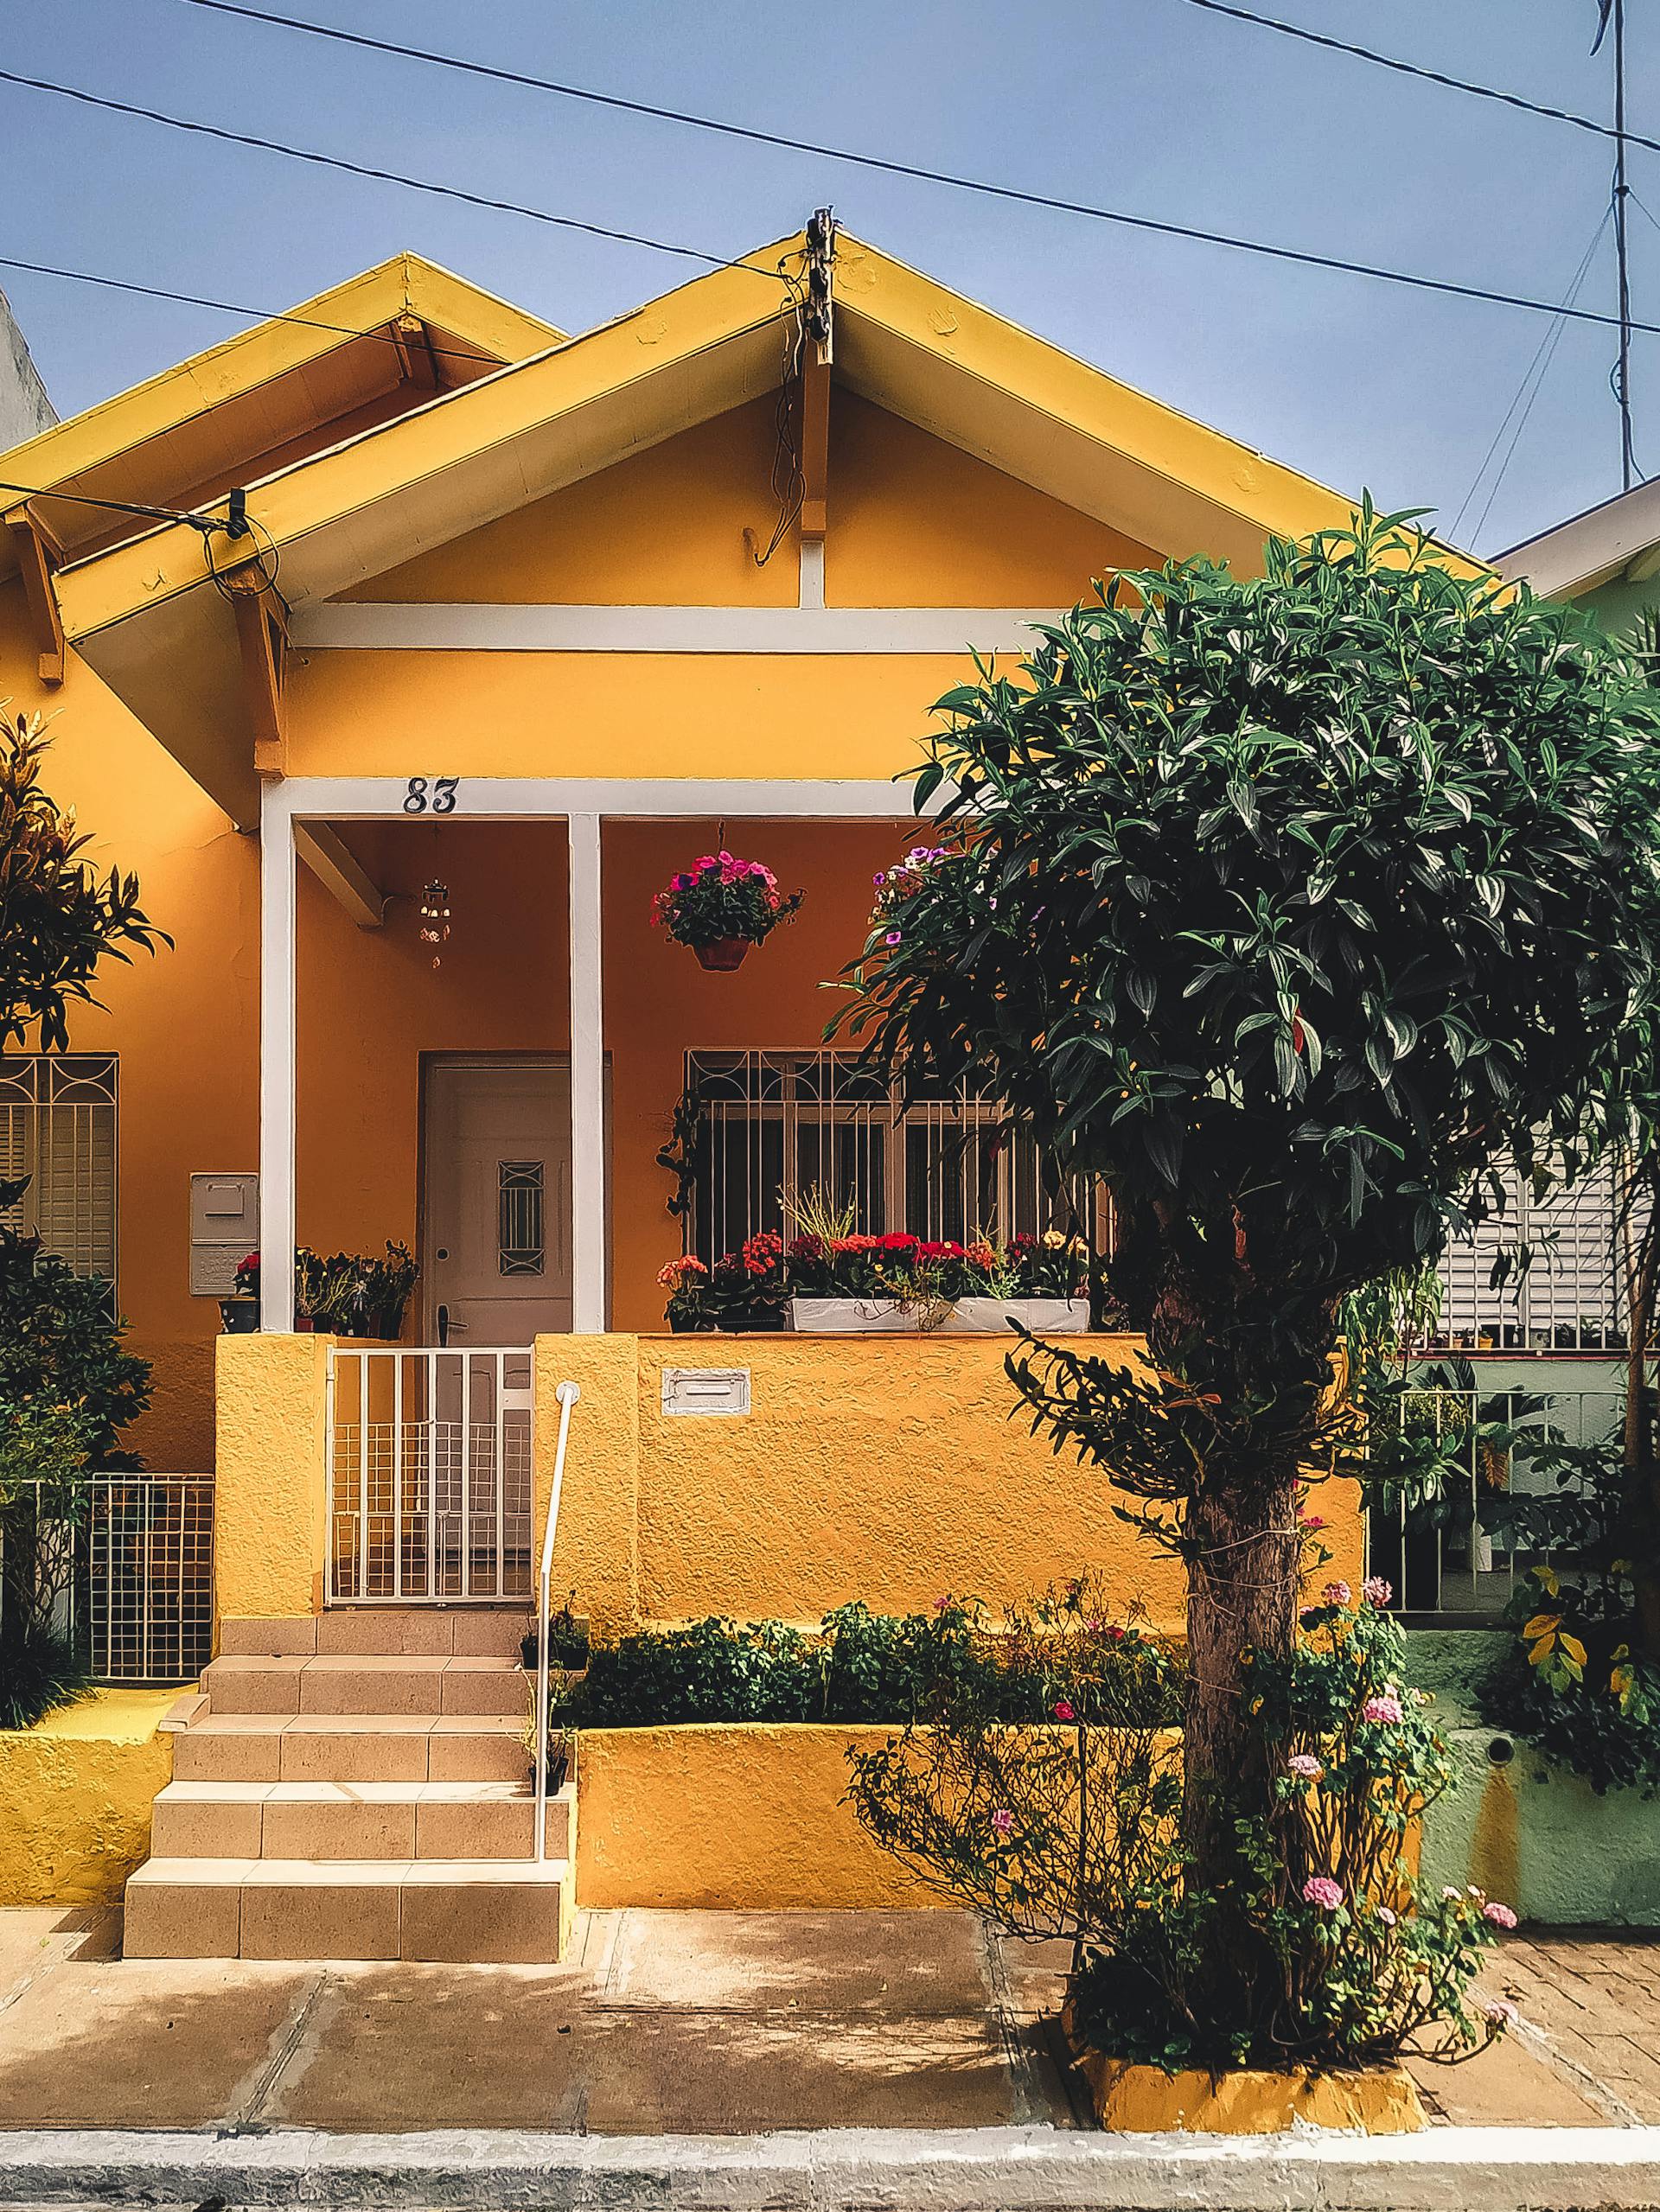 A yellow house with a tree outside | Source: Pexels